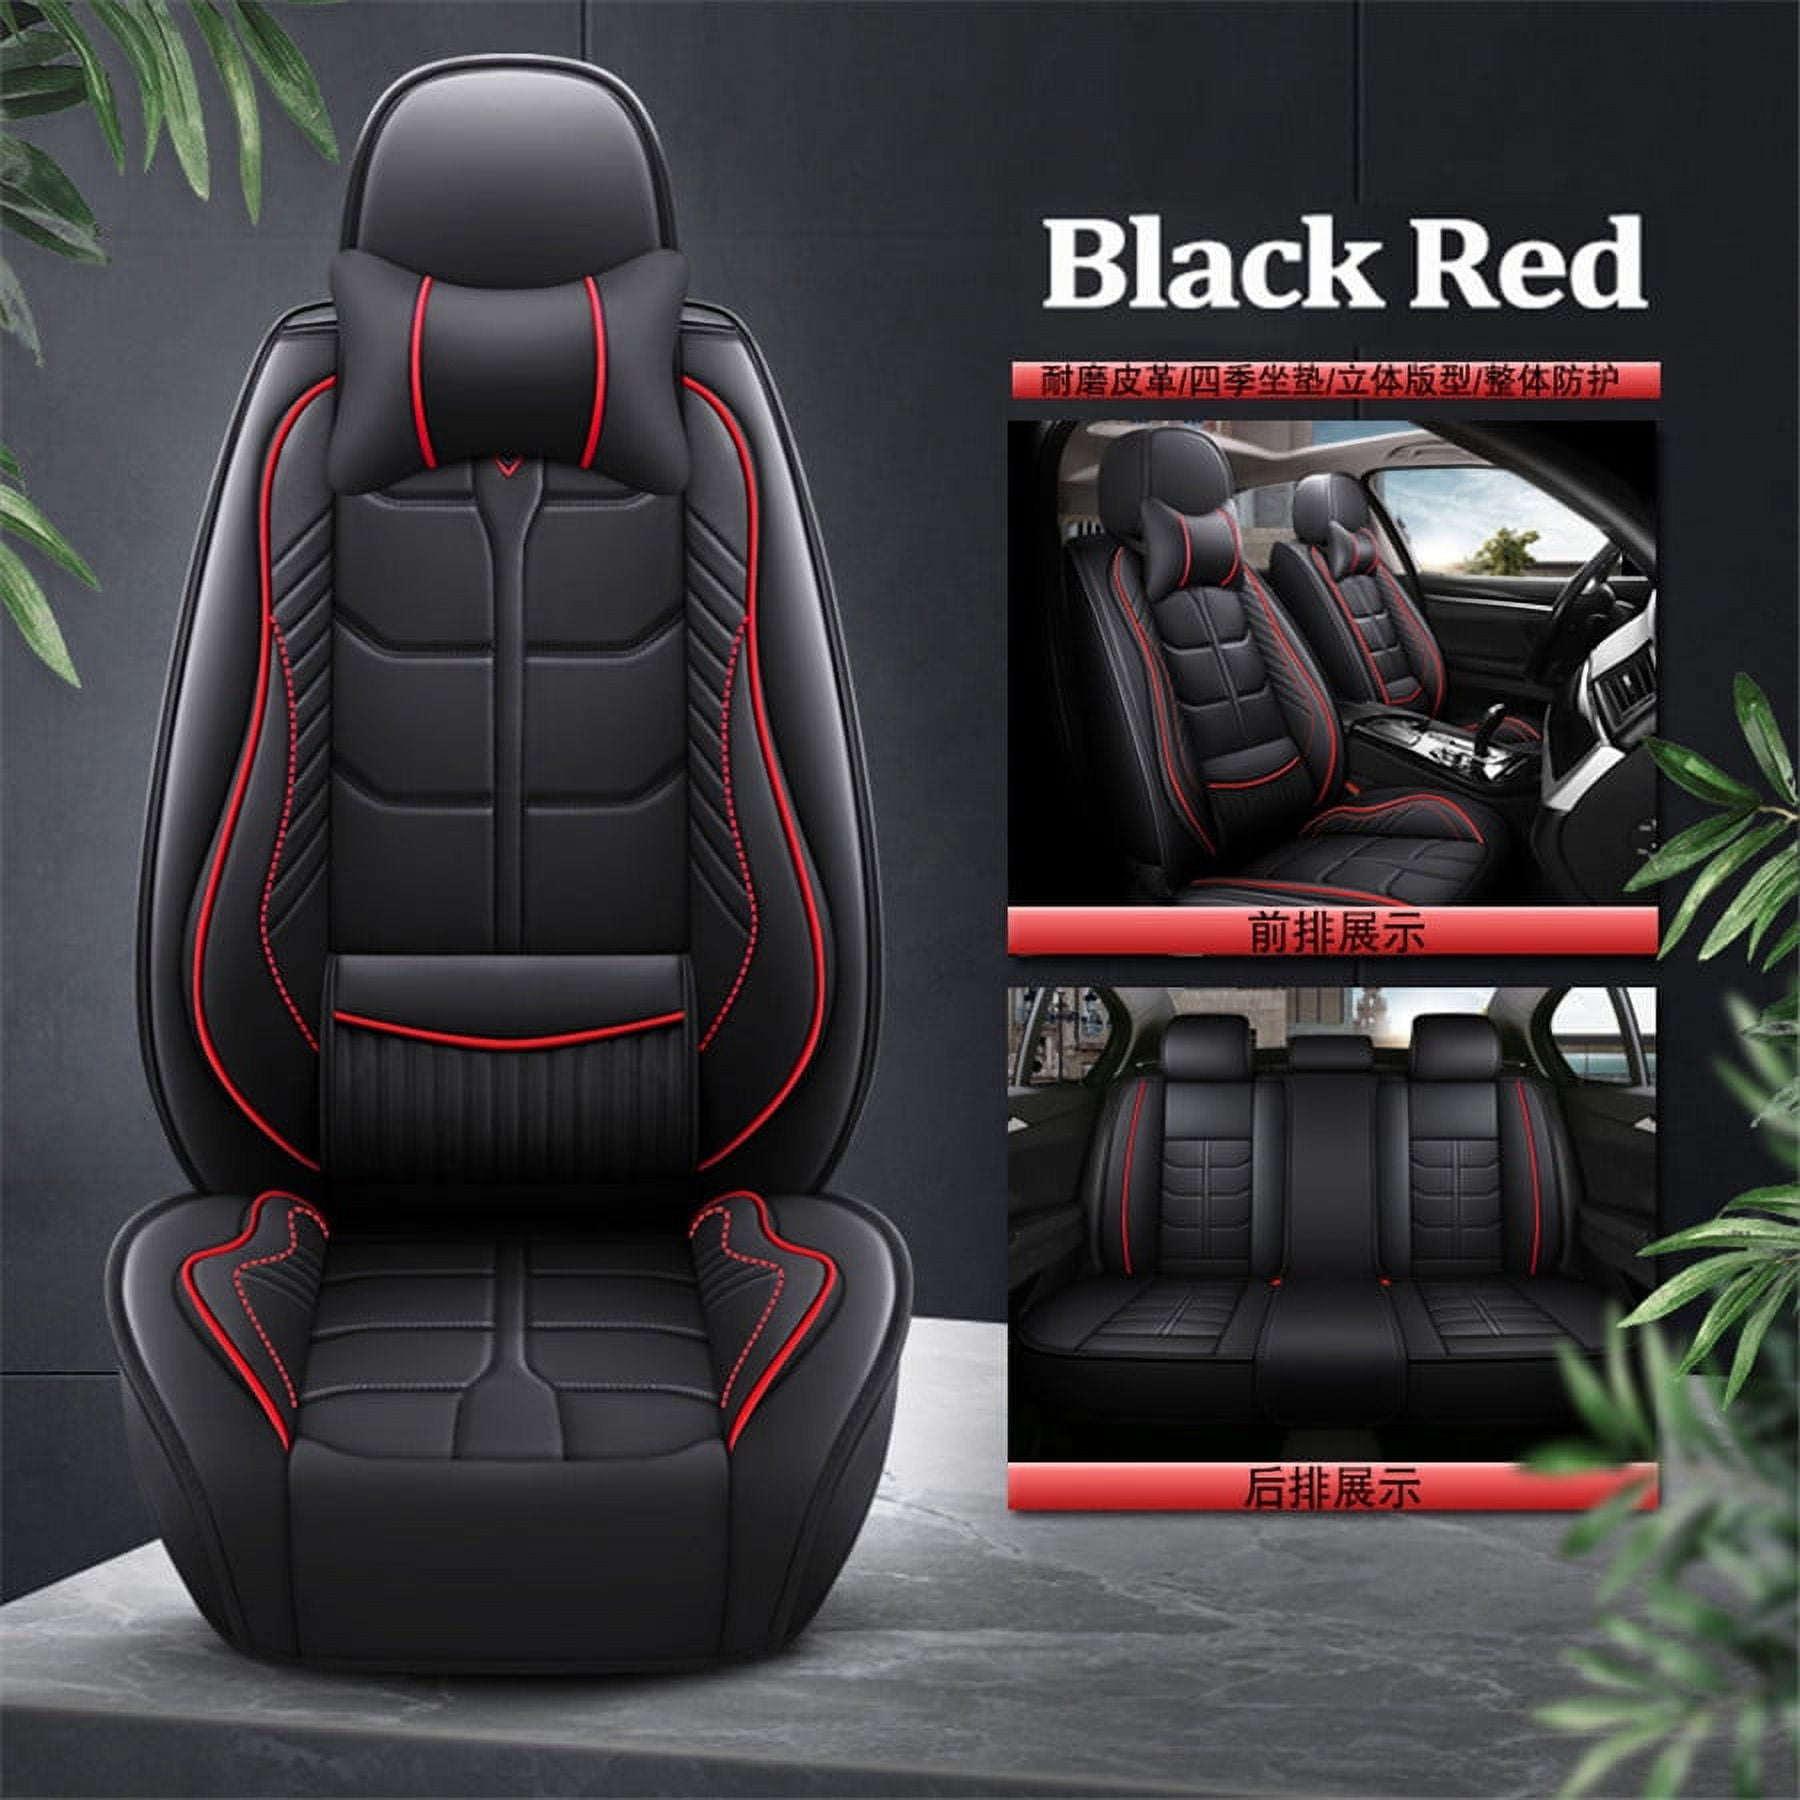 Black & Red PU Leather Car Auto Seat Cover Full Set w/ Pillows